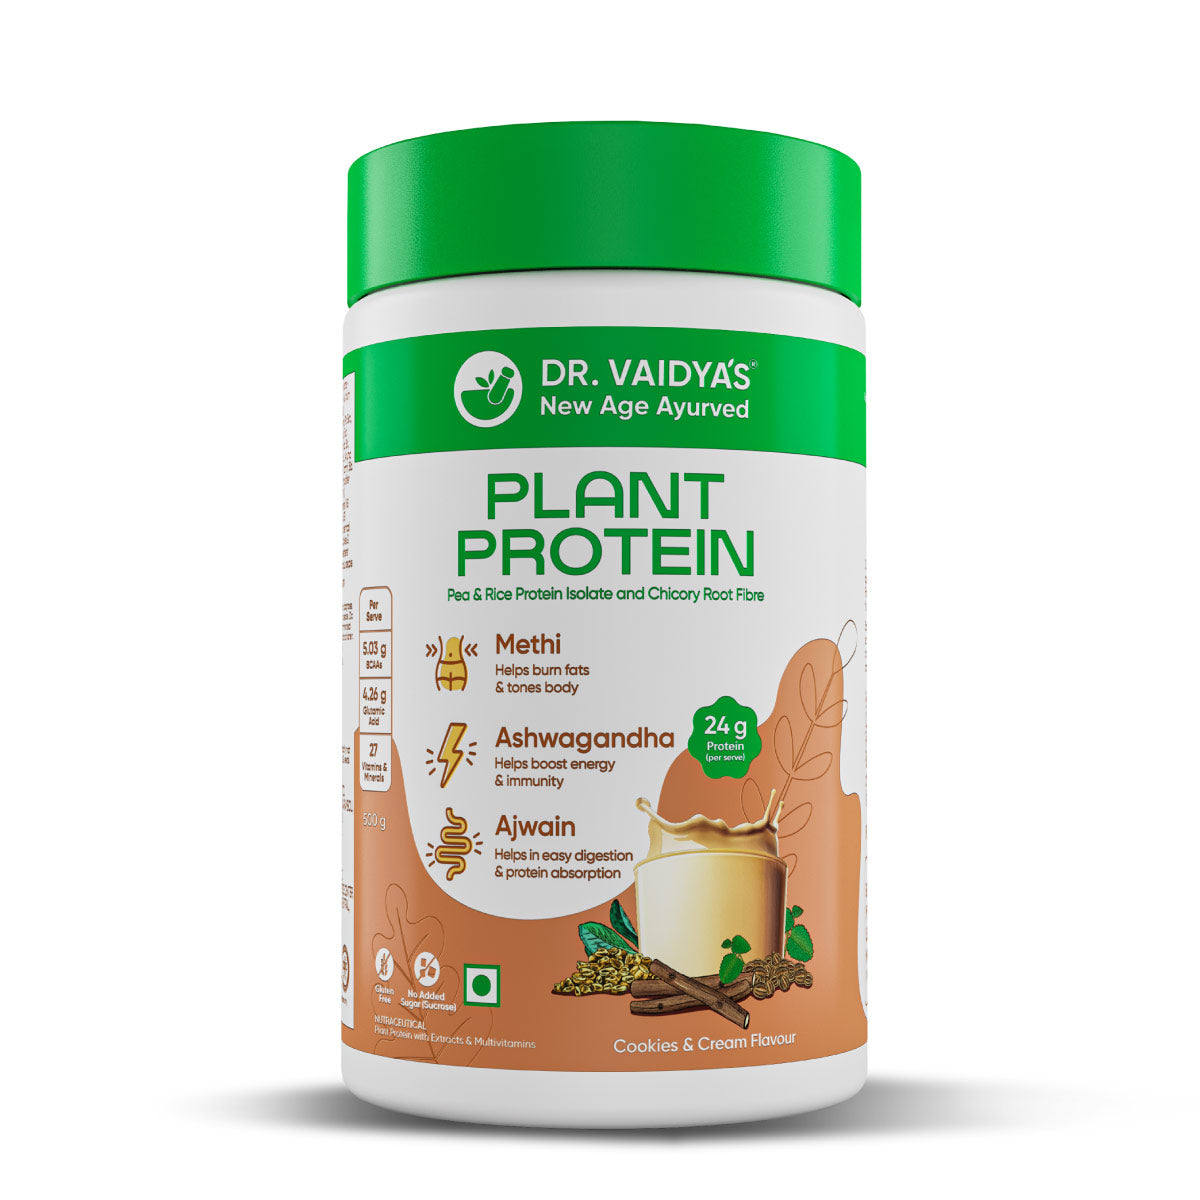 First-Ever Plant Protein Powder Enriched With Methi, Ashwagandha & Ajwain by Dr. Vaidya's